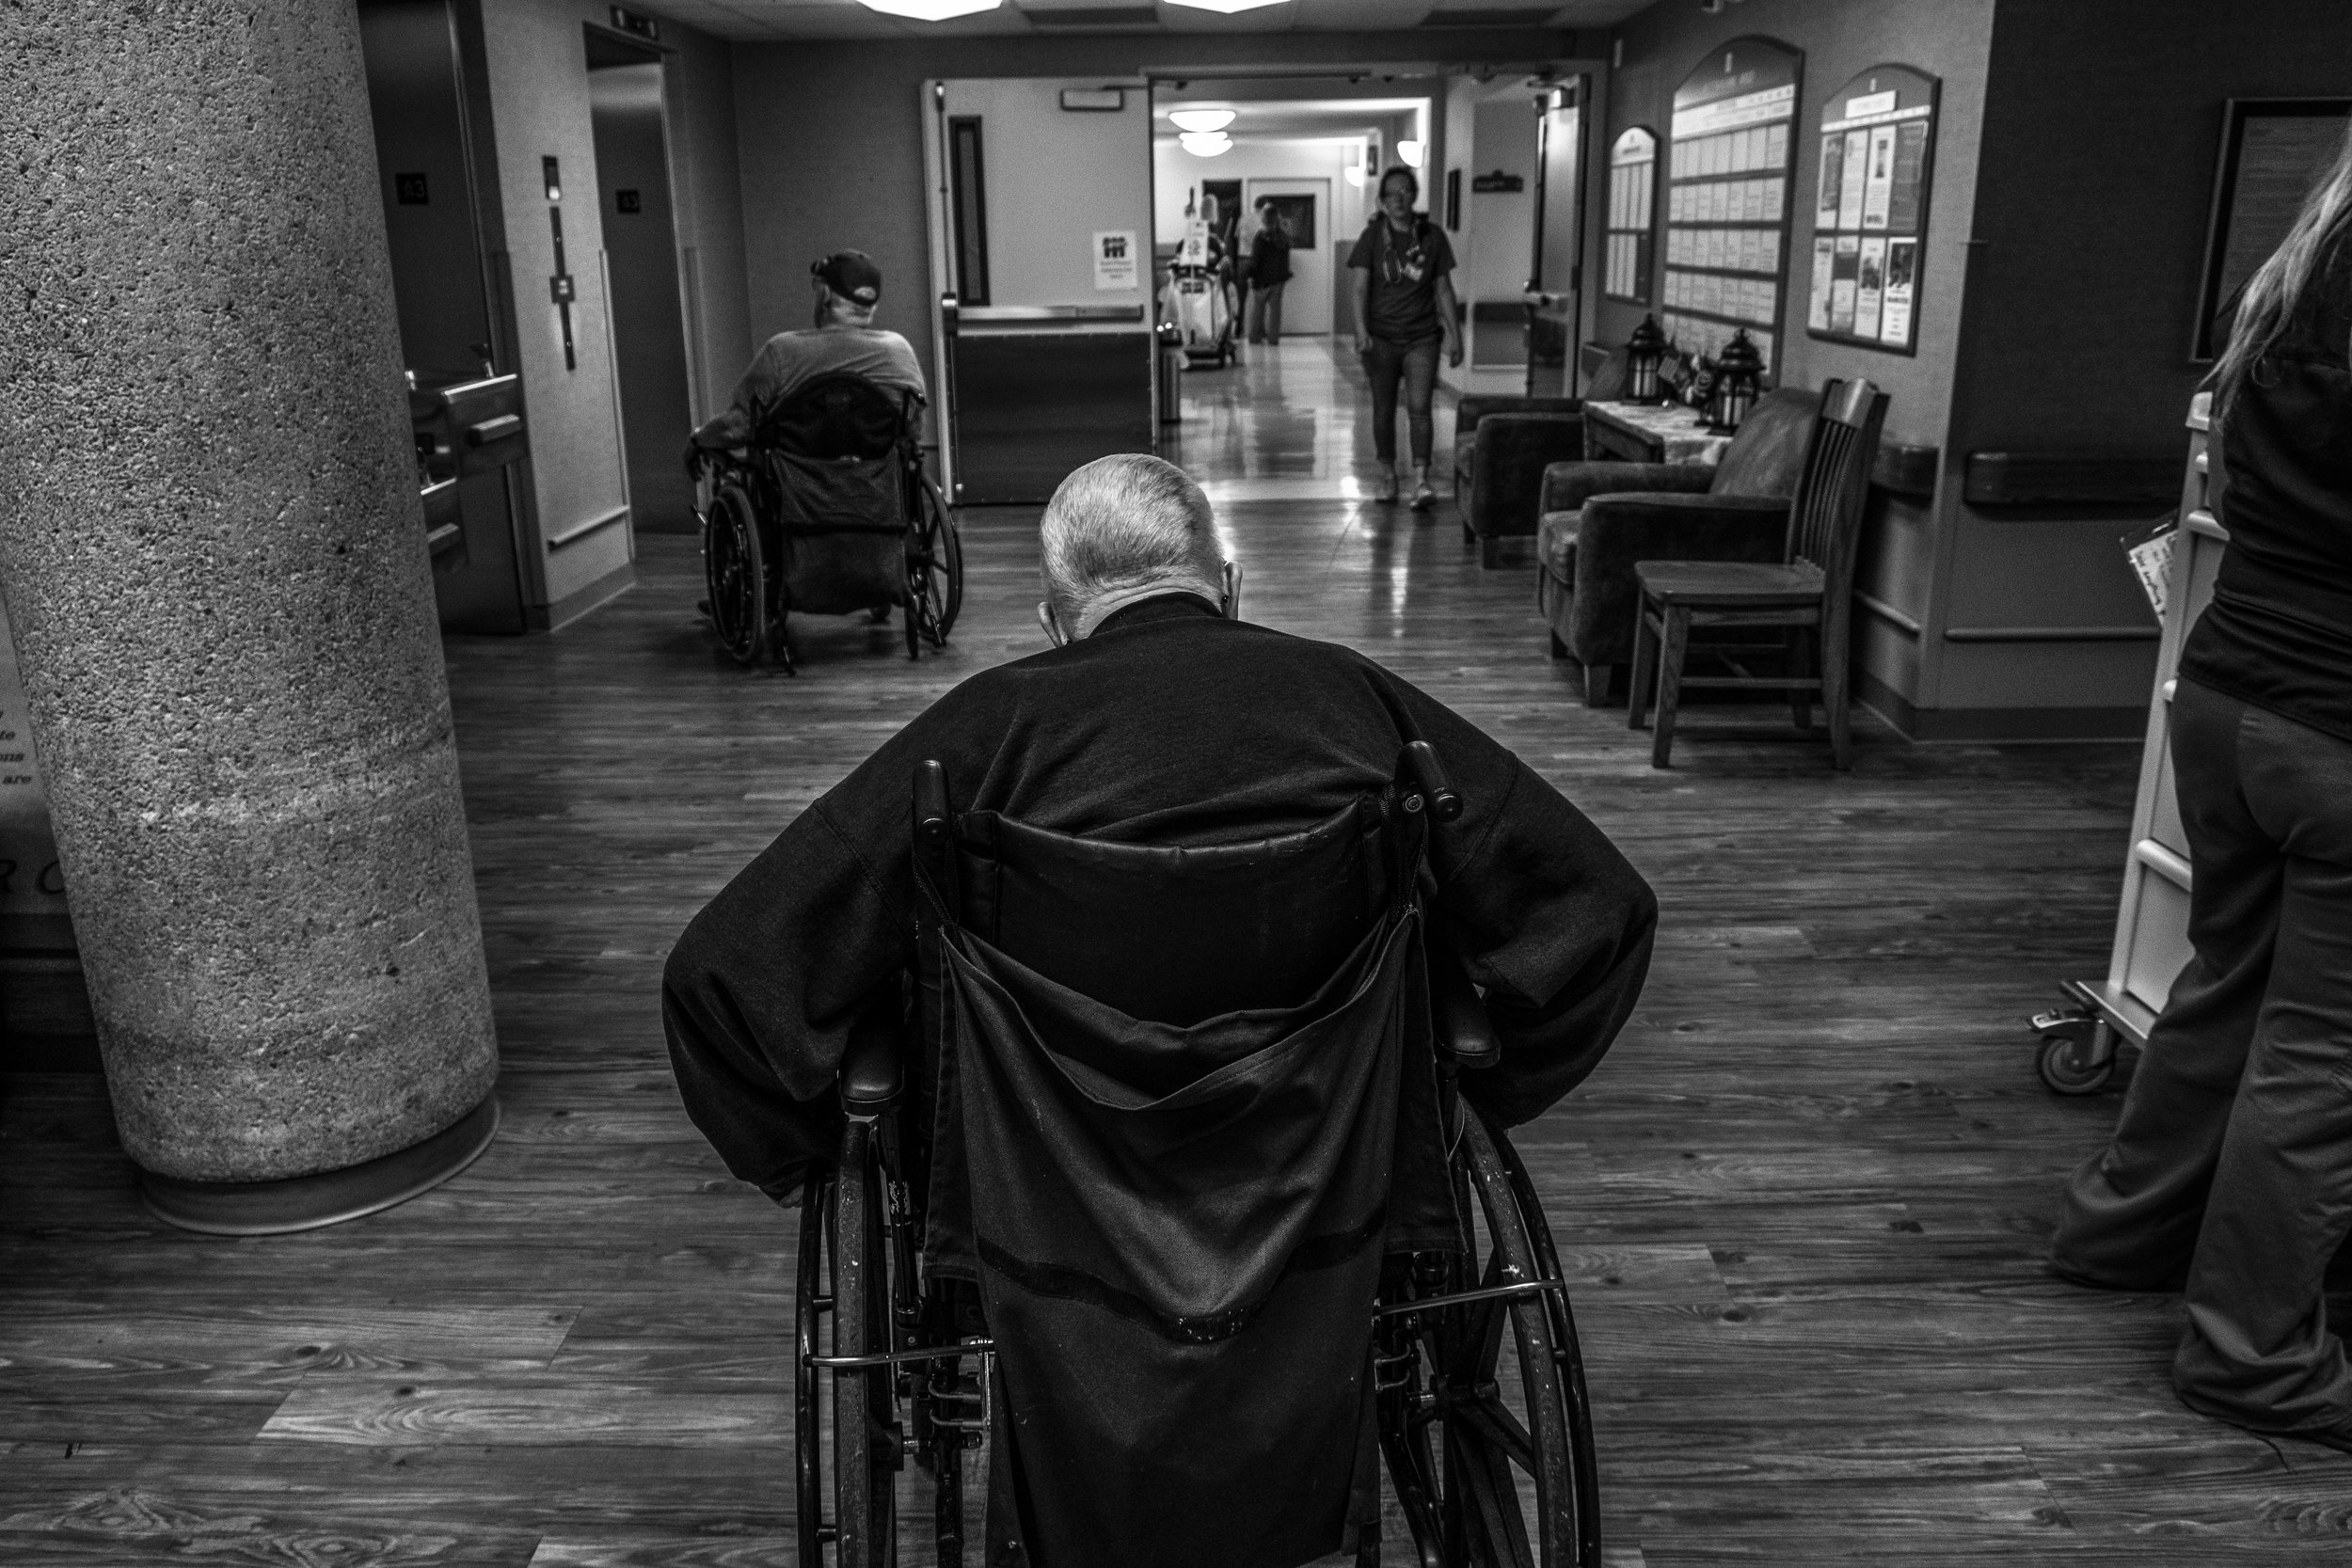  Veterans head to the elevator at the Missouri Veterans Home in Mexico, Missouri on Friday, Jun. 21, 2019. The Missouri Veterans home cares for 150 veterans from all branches of the military. 